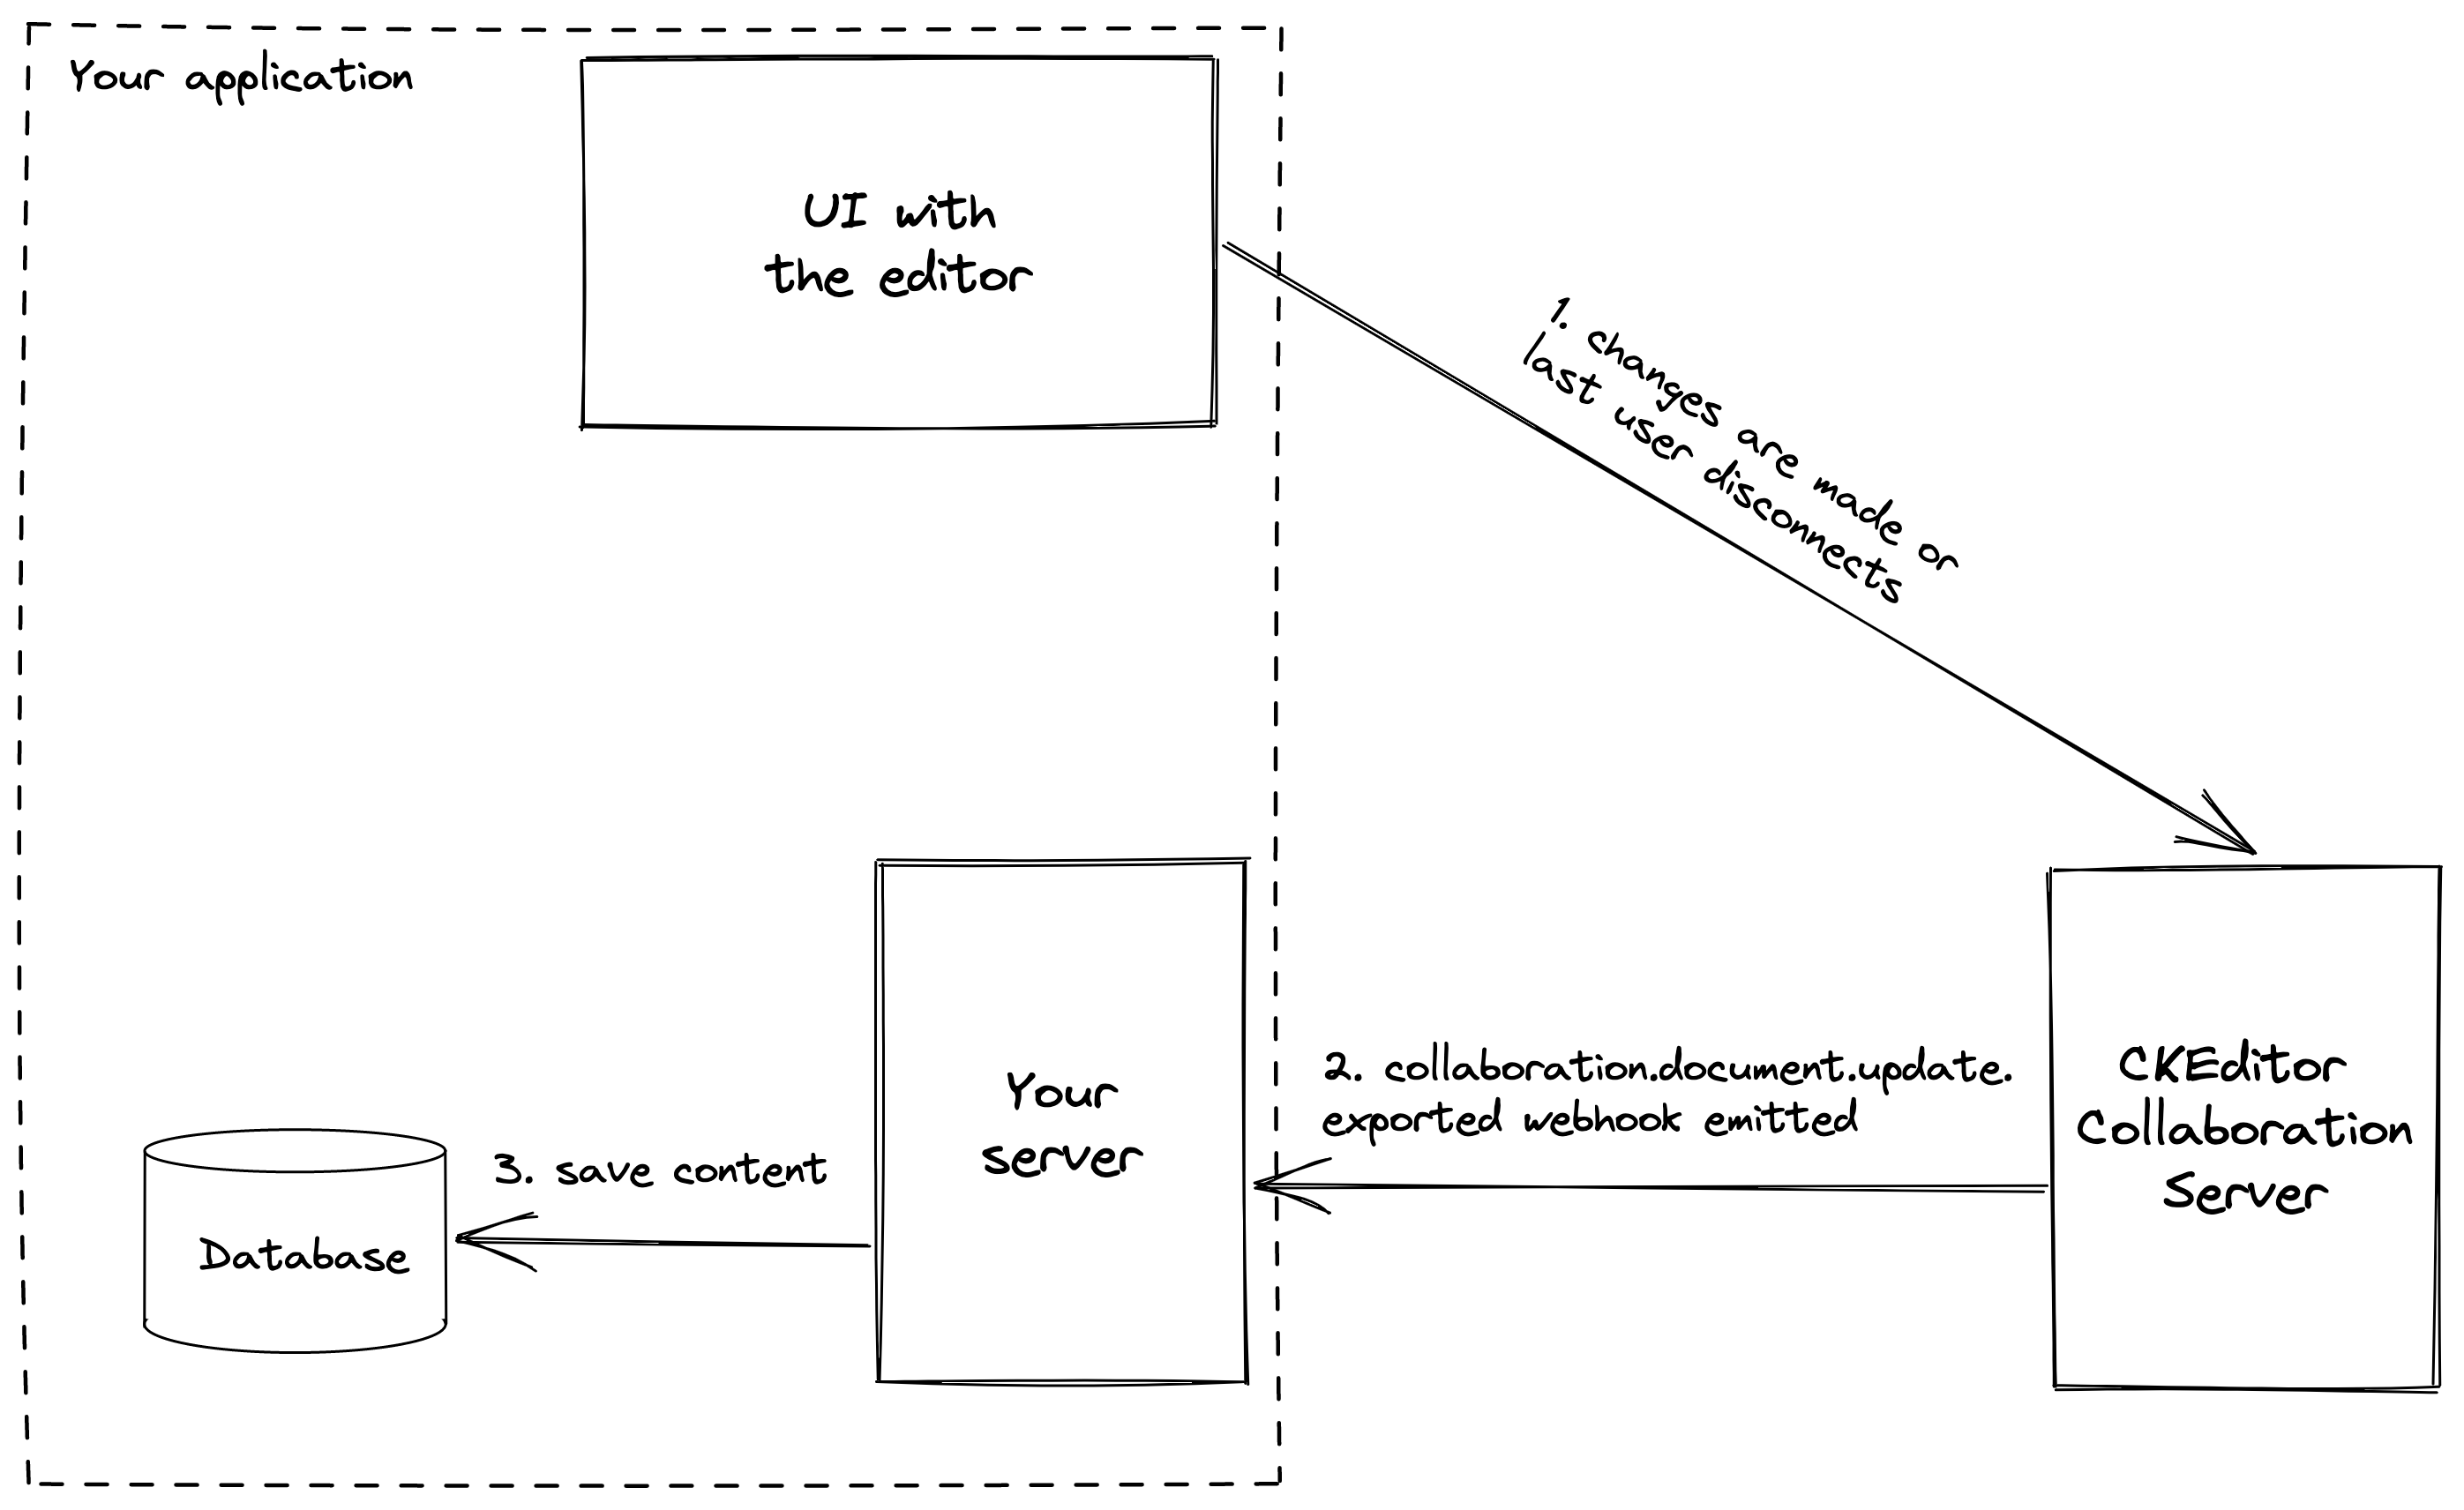 The workflow of saving data returned by the collaboration.document.update.exported webhook.